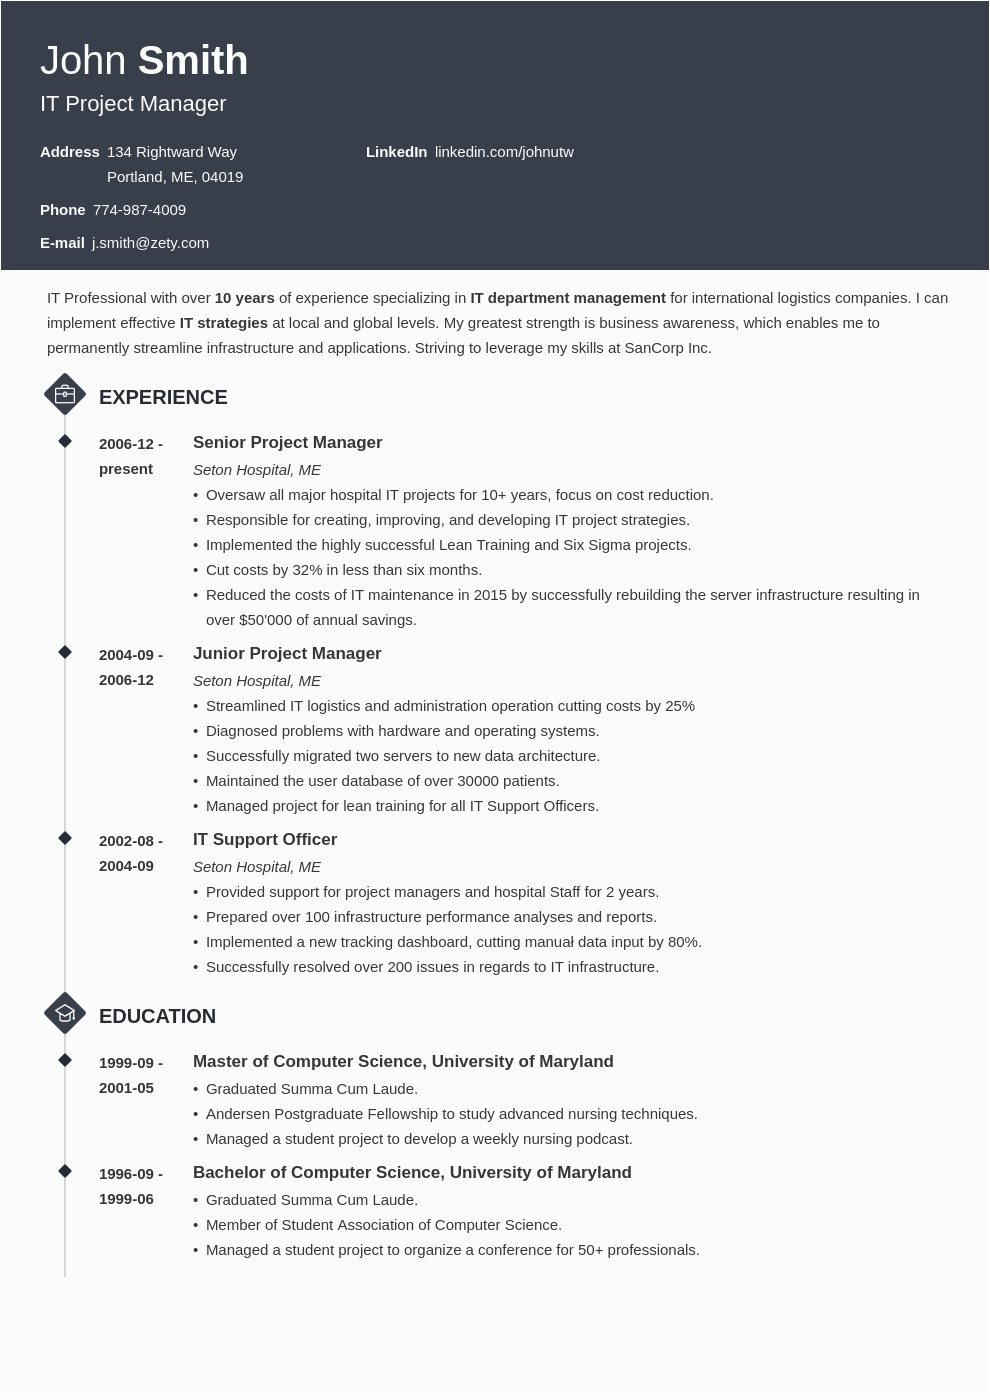 Diamond Resume Cv Template Free Download Best Resume Templates for 2021 14 top Picks to Download